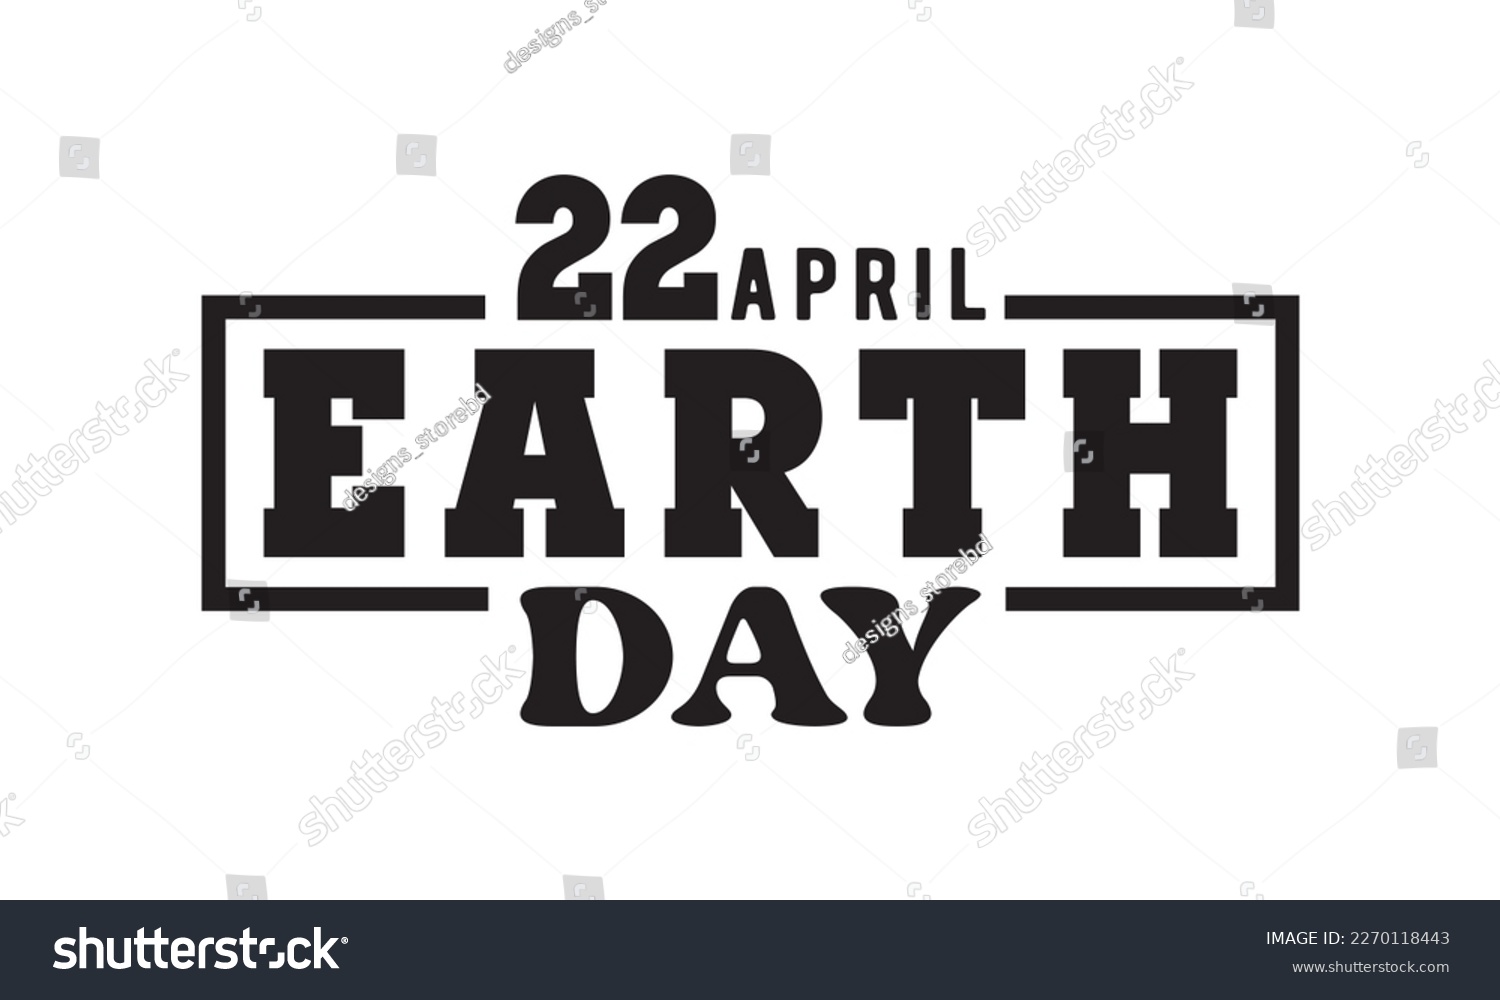 SVG of 22 april earth day svg, Earth day svg design bundle, Earth tshirt design bundle, April 22, earth vecttor icon map space, cut File Cricut, Printable Vector Illustration, tshirt eps svg